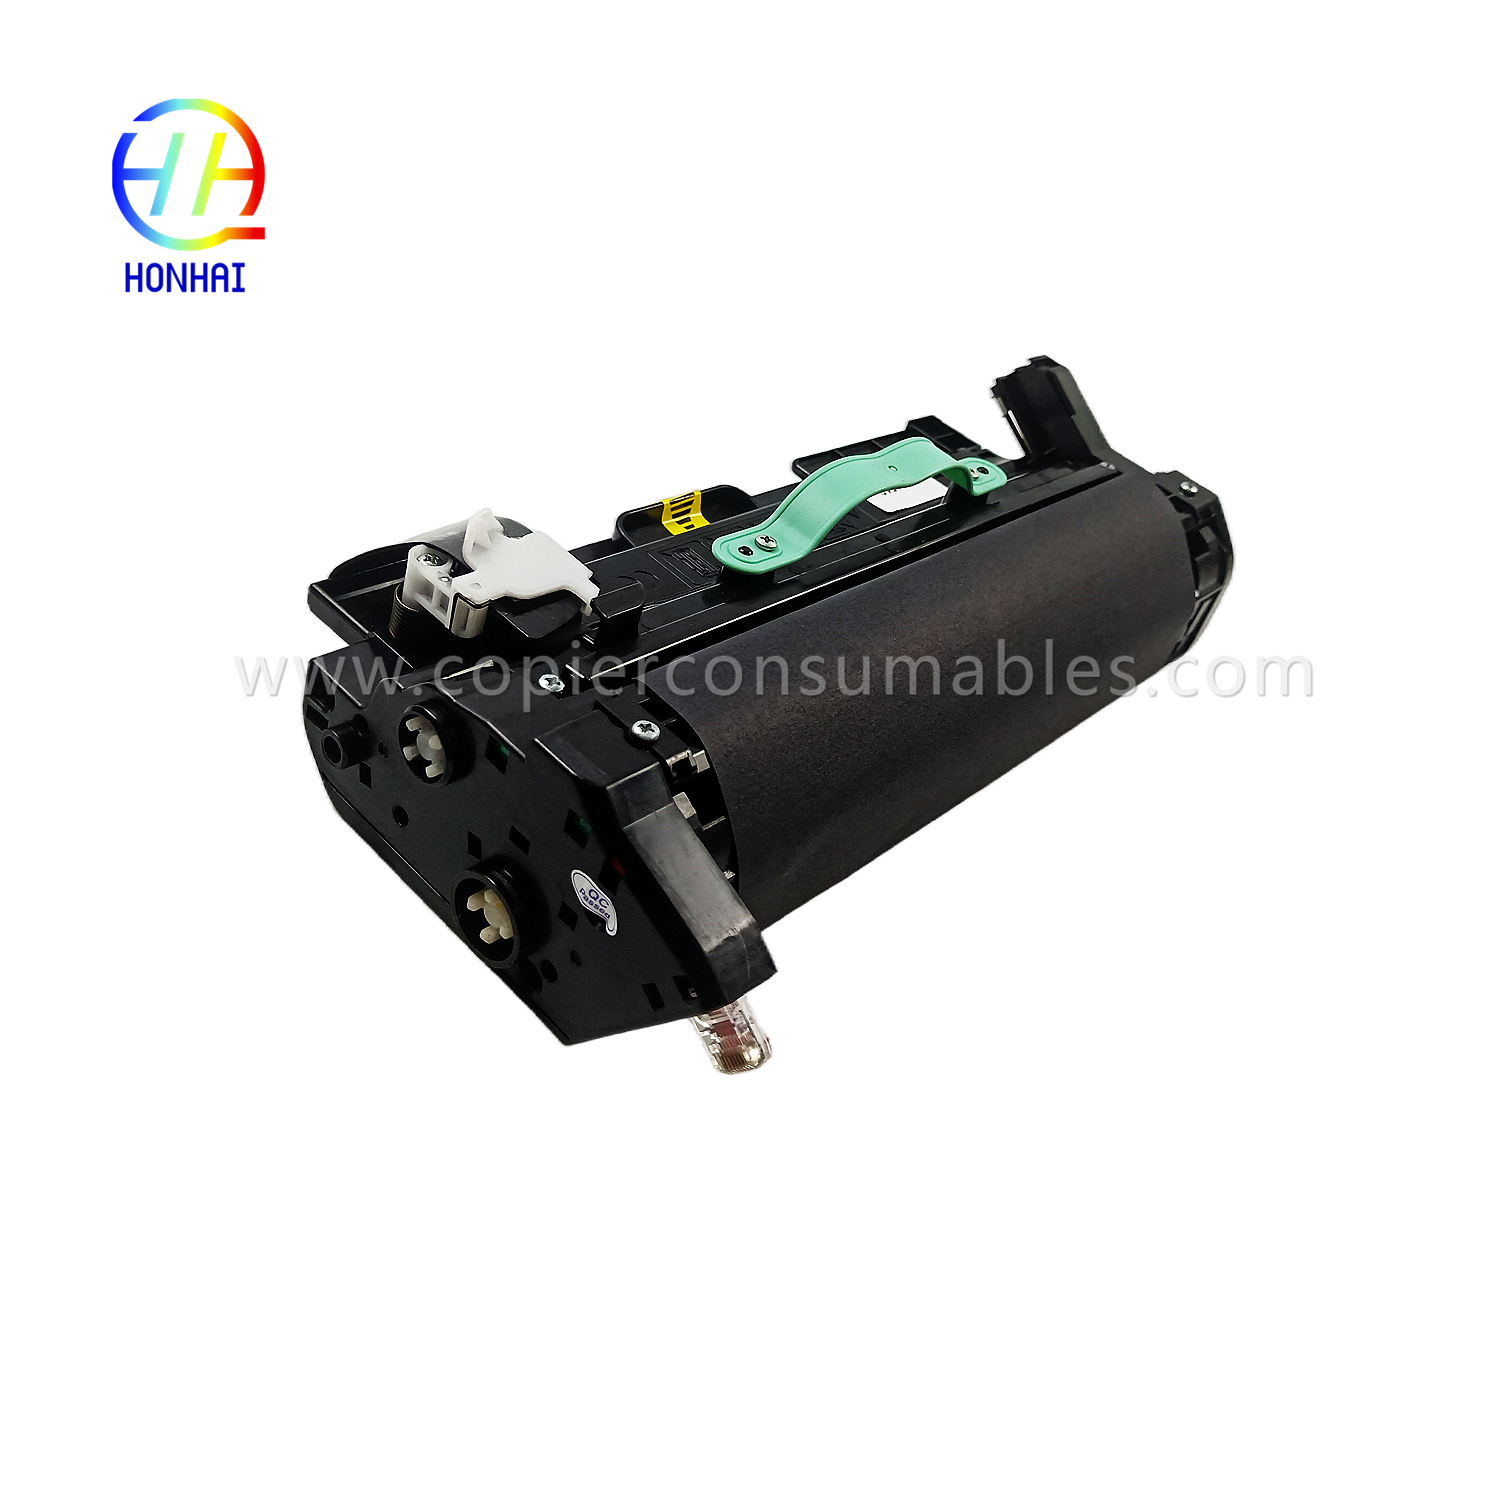 https://www.copierconsumables.com/fuser-unit-for-samsung-ml4510-ml4512-ml-4510nd-ml-4512nd-ml-4510-ml-4512-jc91-01028a-fusing-product/2-assembly-